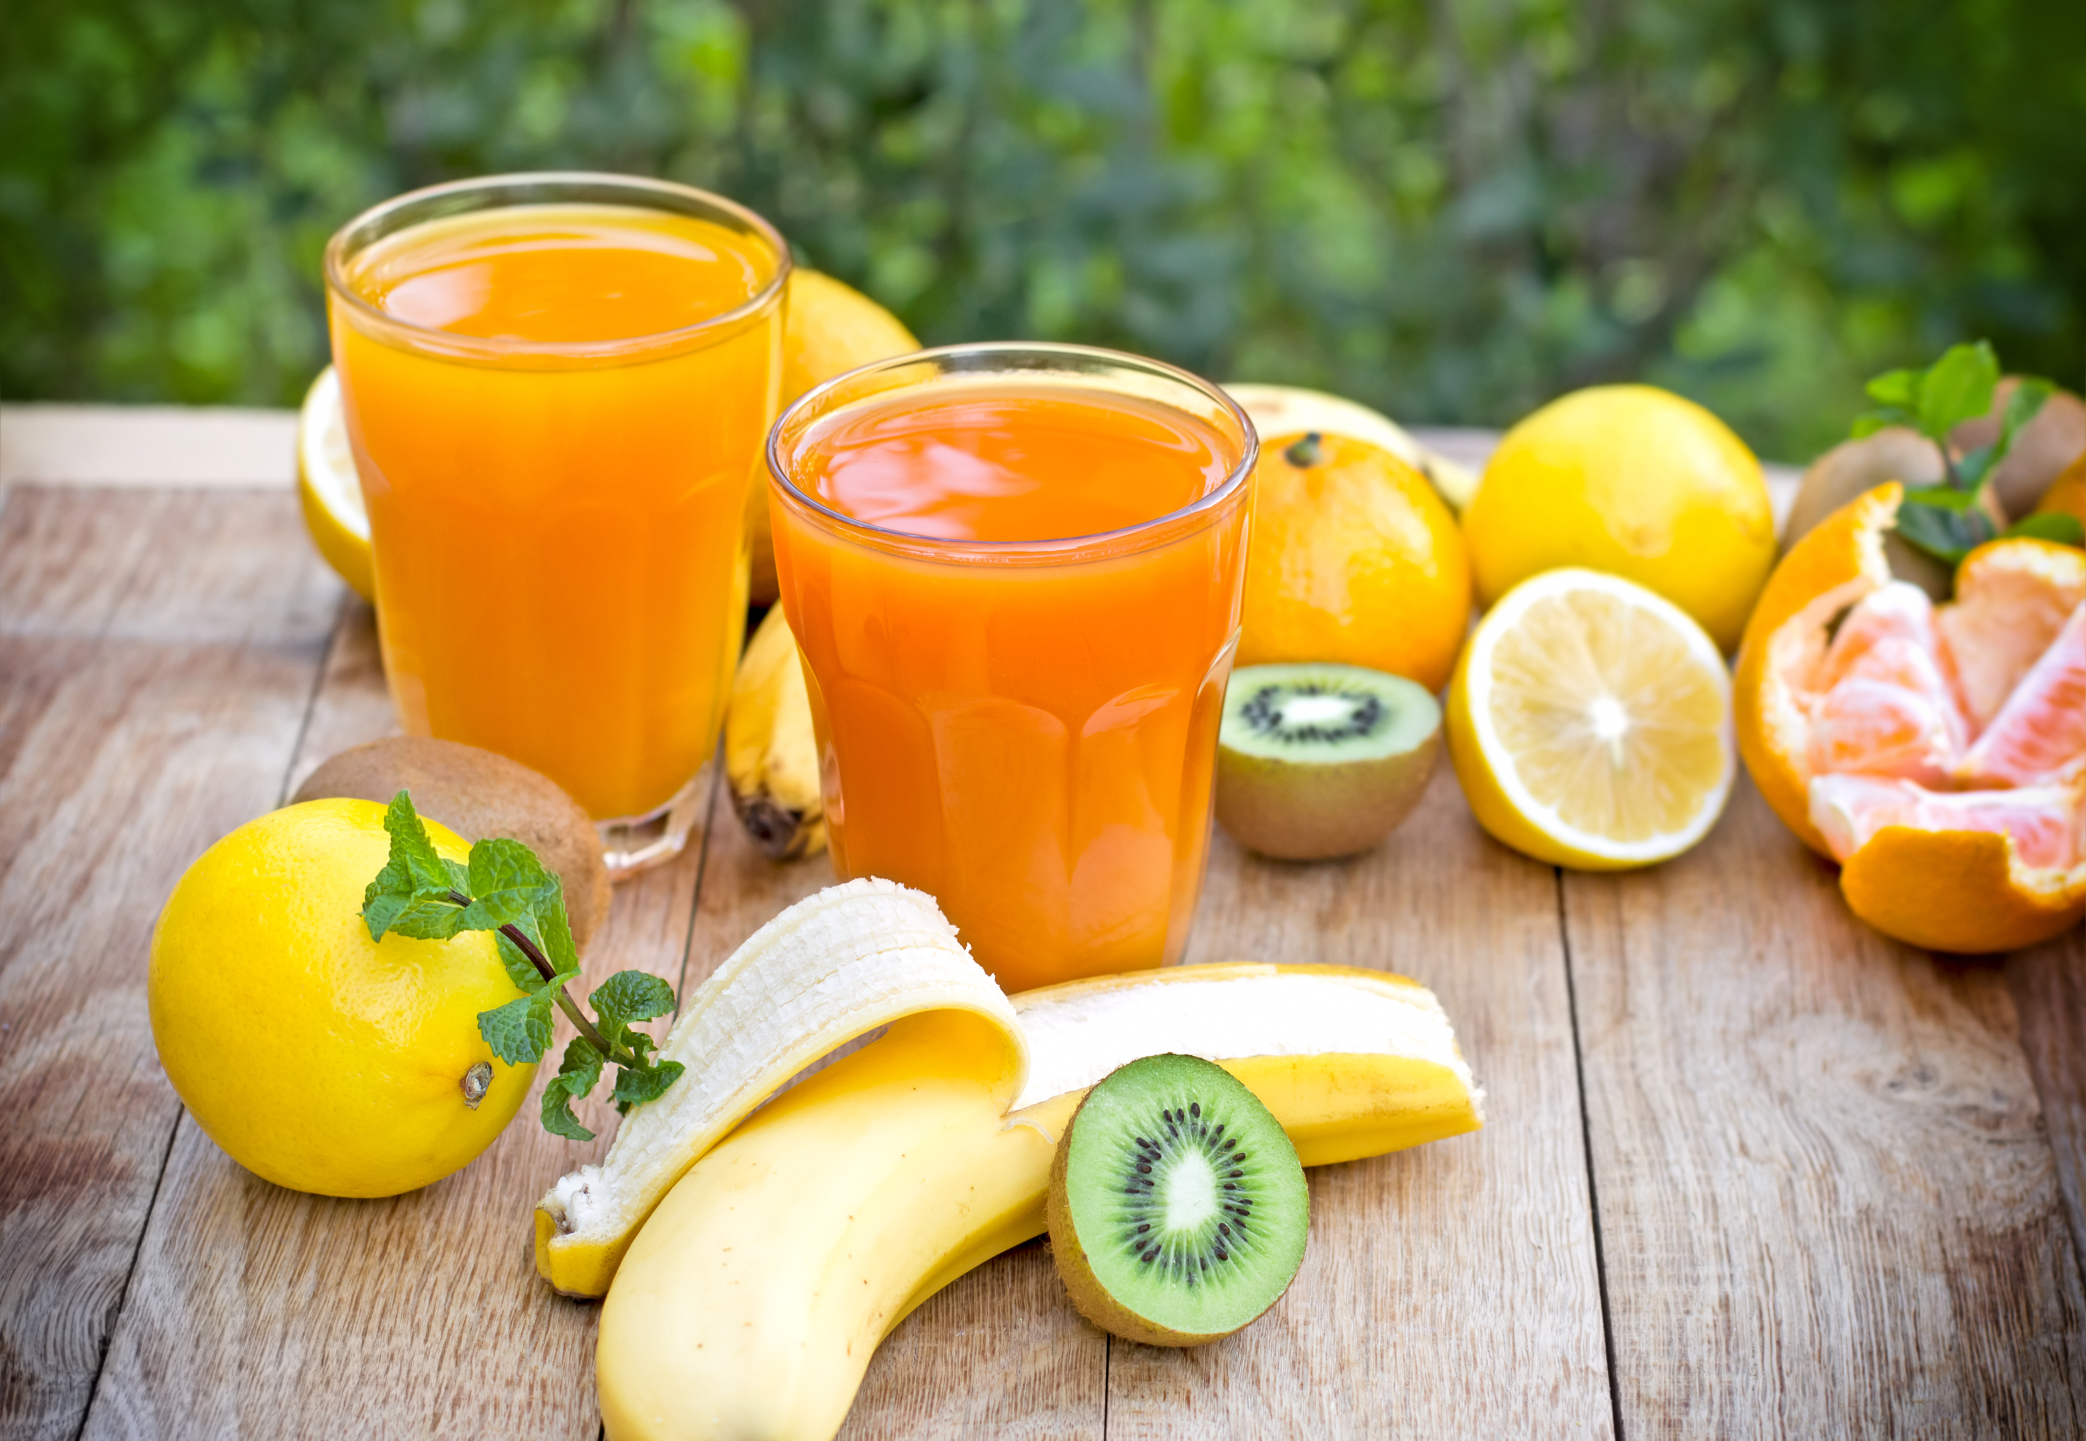 What Drinks Contain Vitamin C? | livestrong